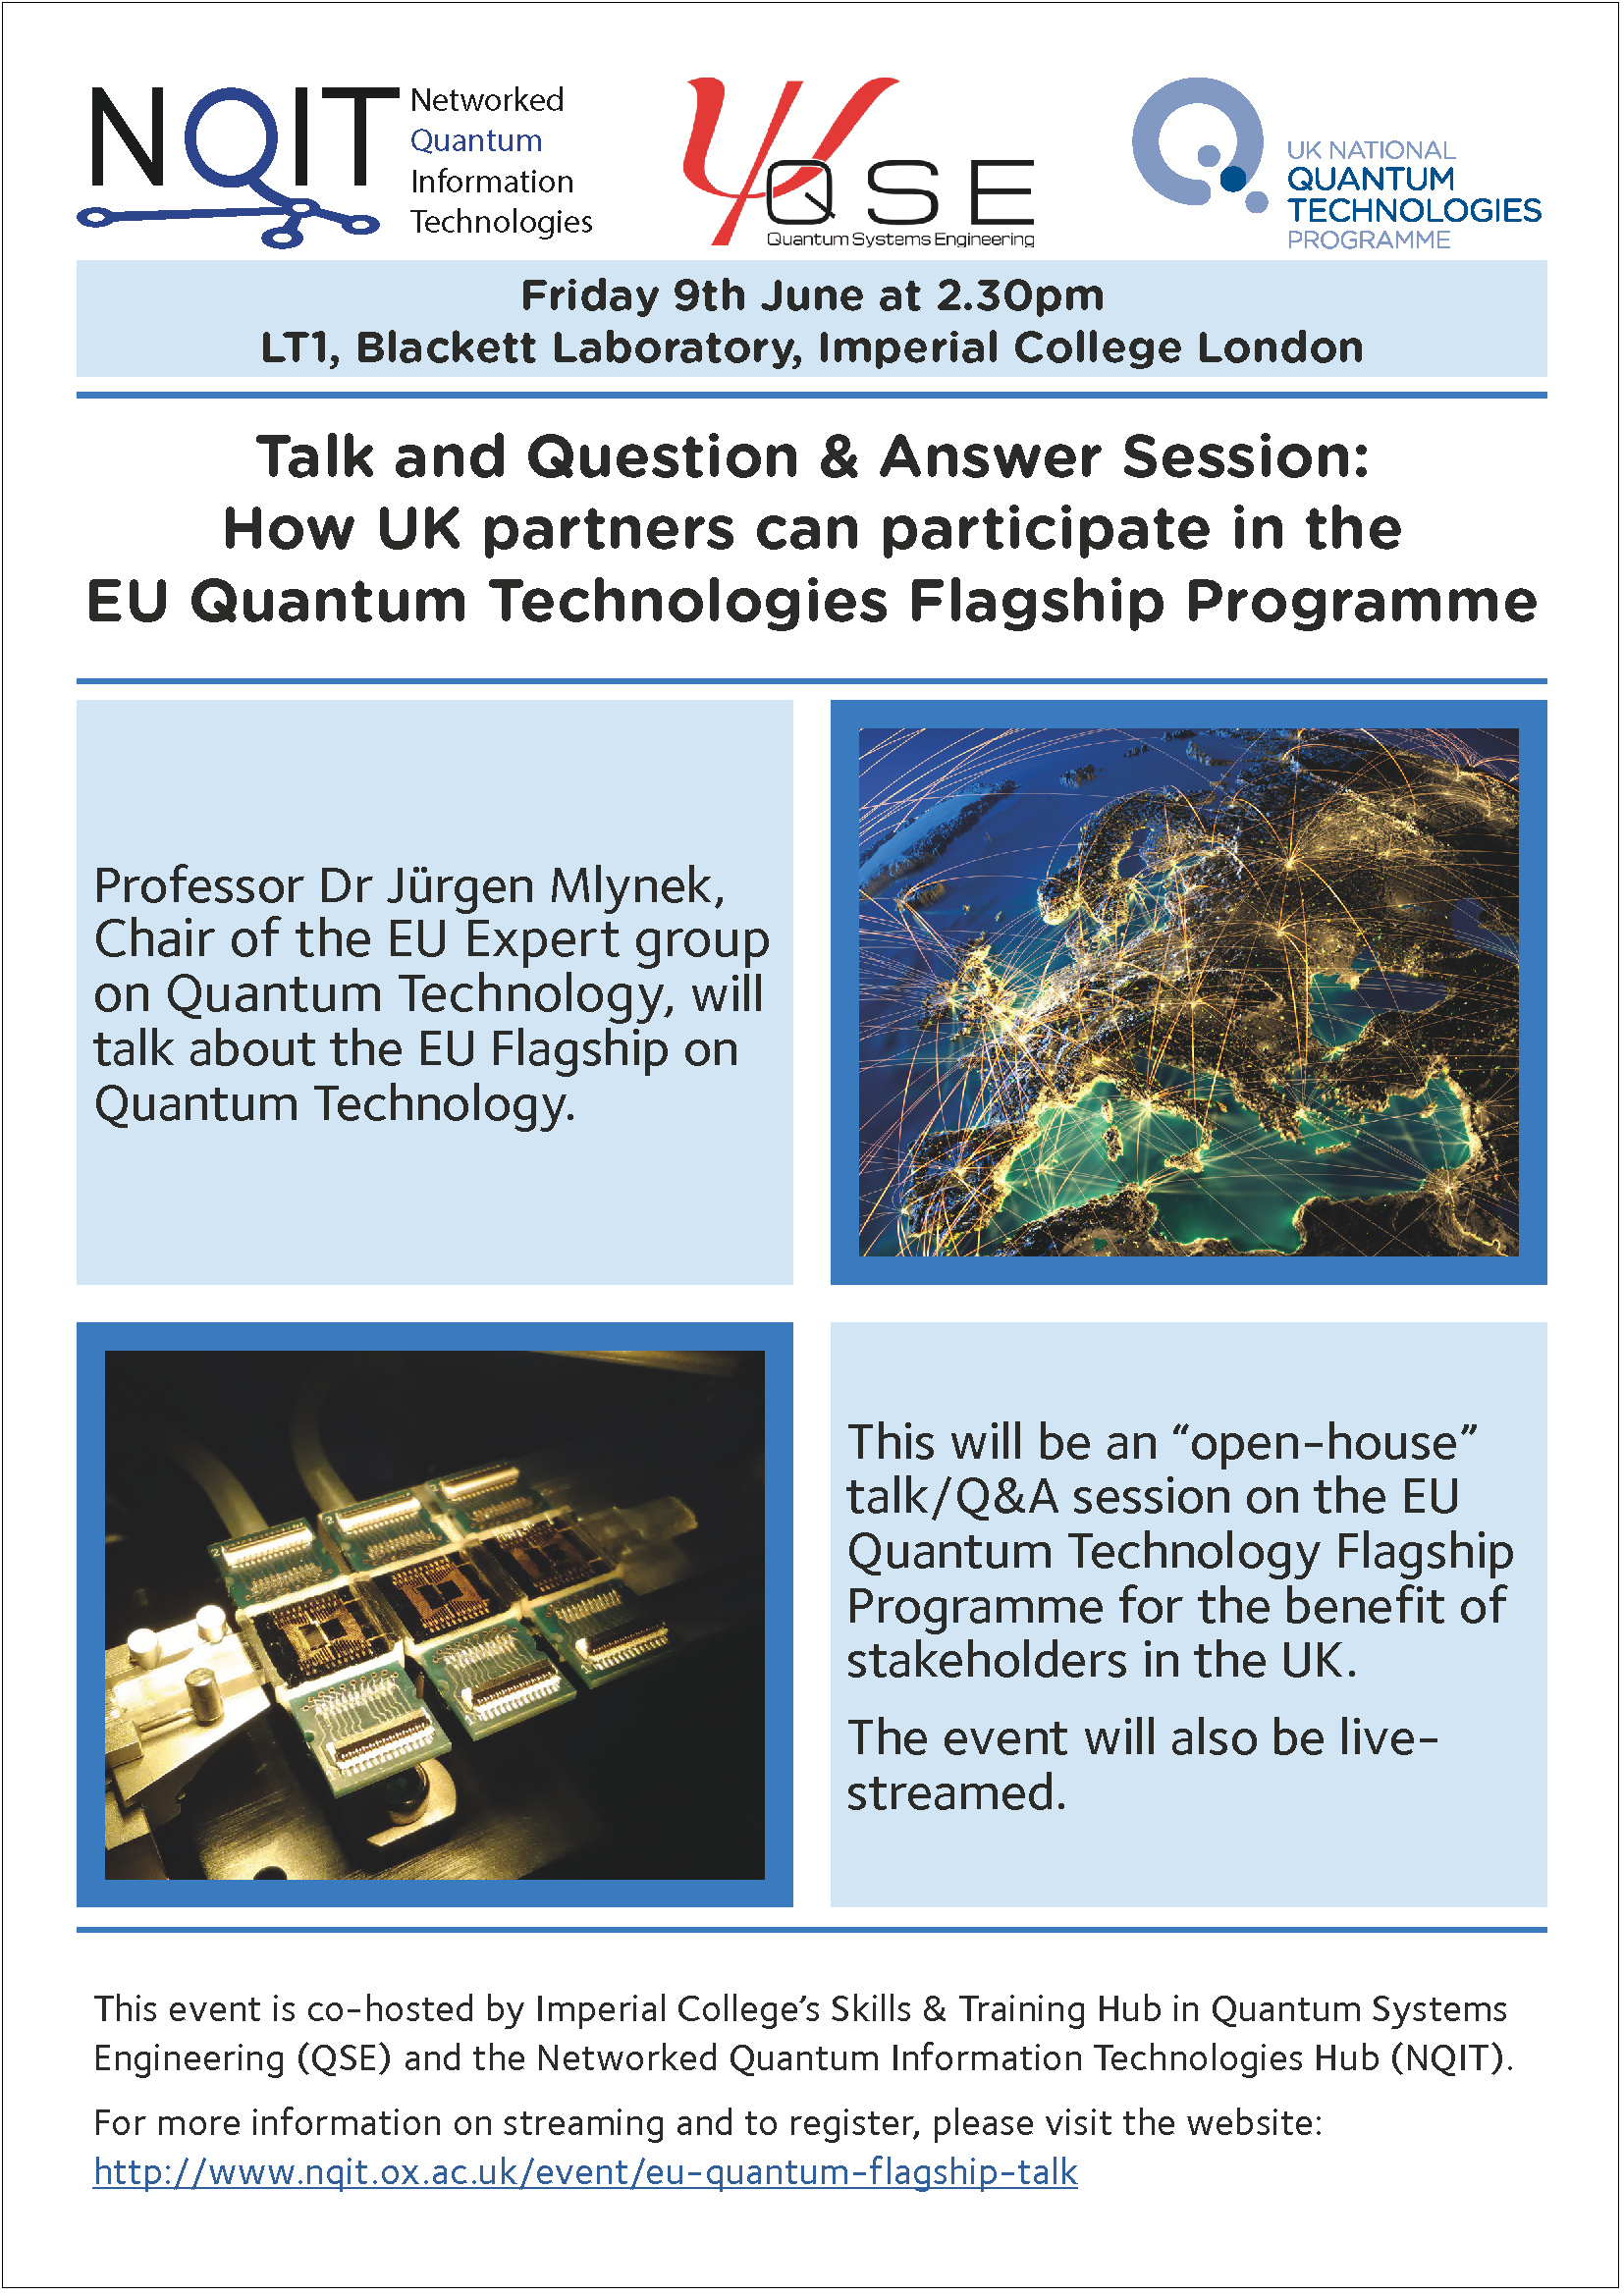 Question and Answer session: How UK partners can participate in the EU Quantum Technologies Flagship Programme